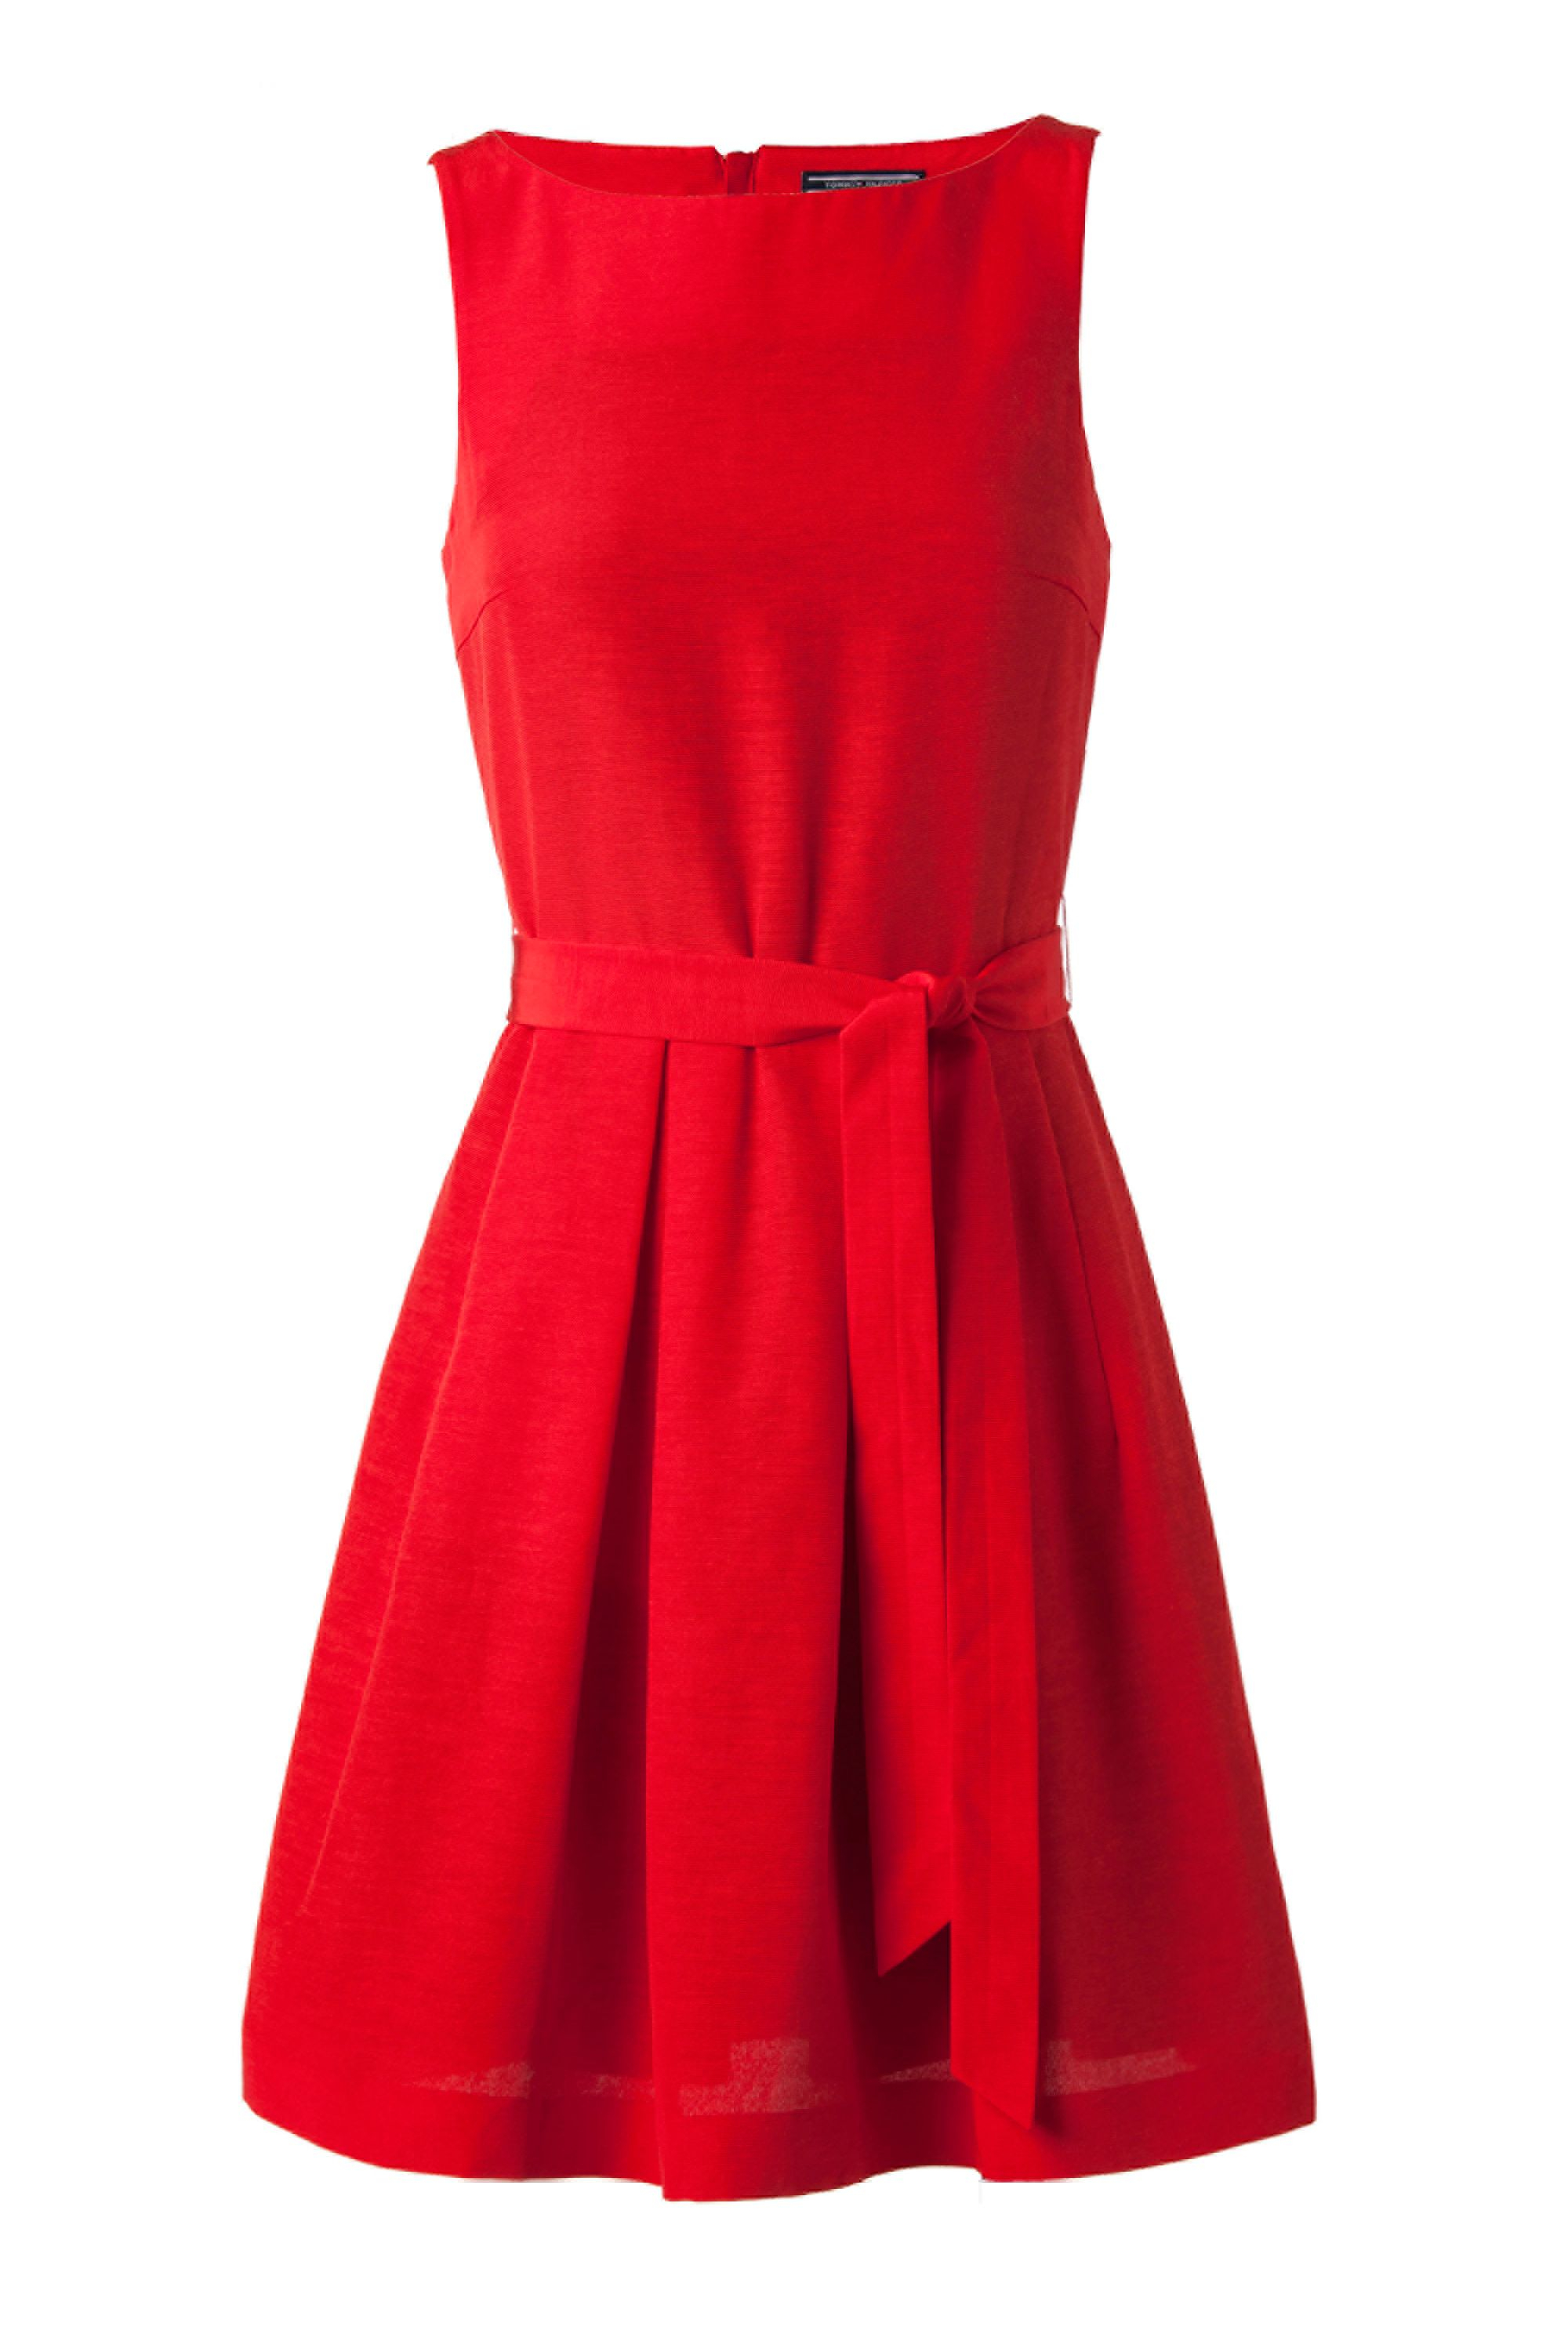 Tommy Hilfiger Ulma Sleeveless Dress in Red (Tomato) | Lyst